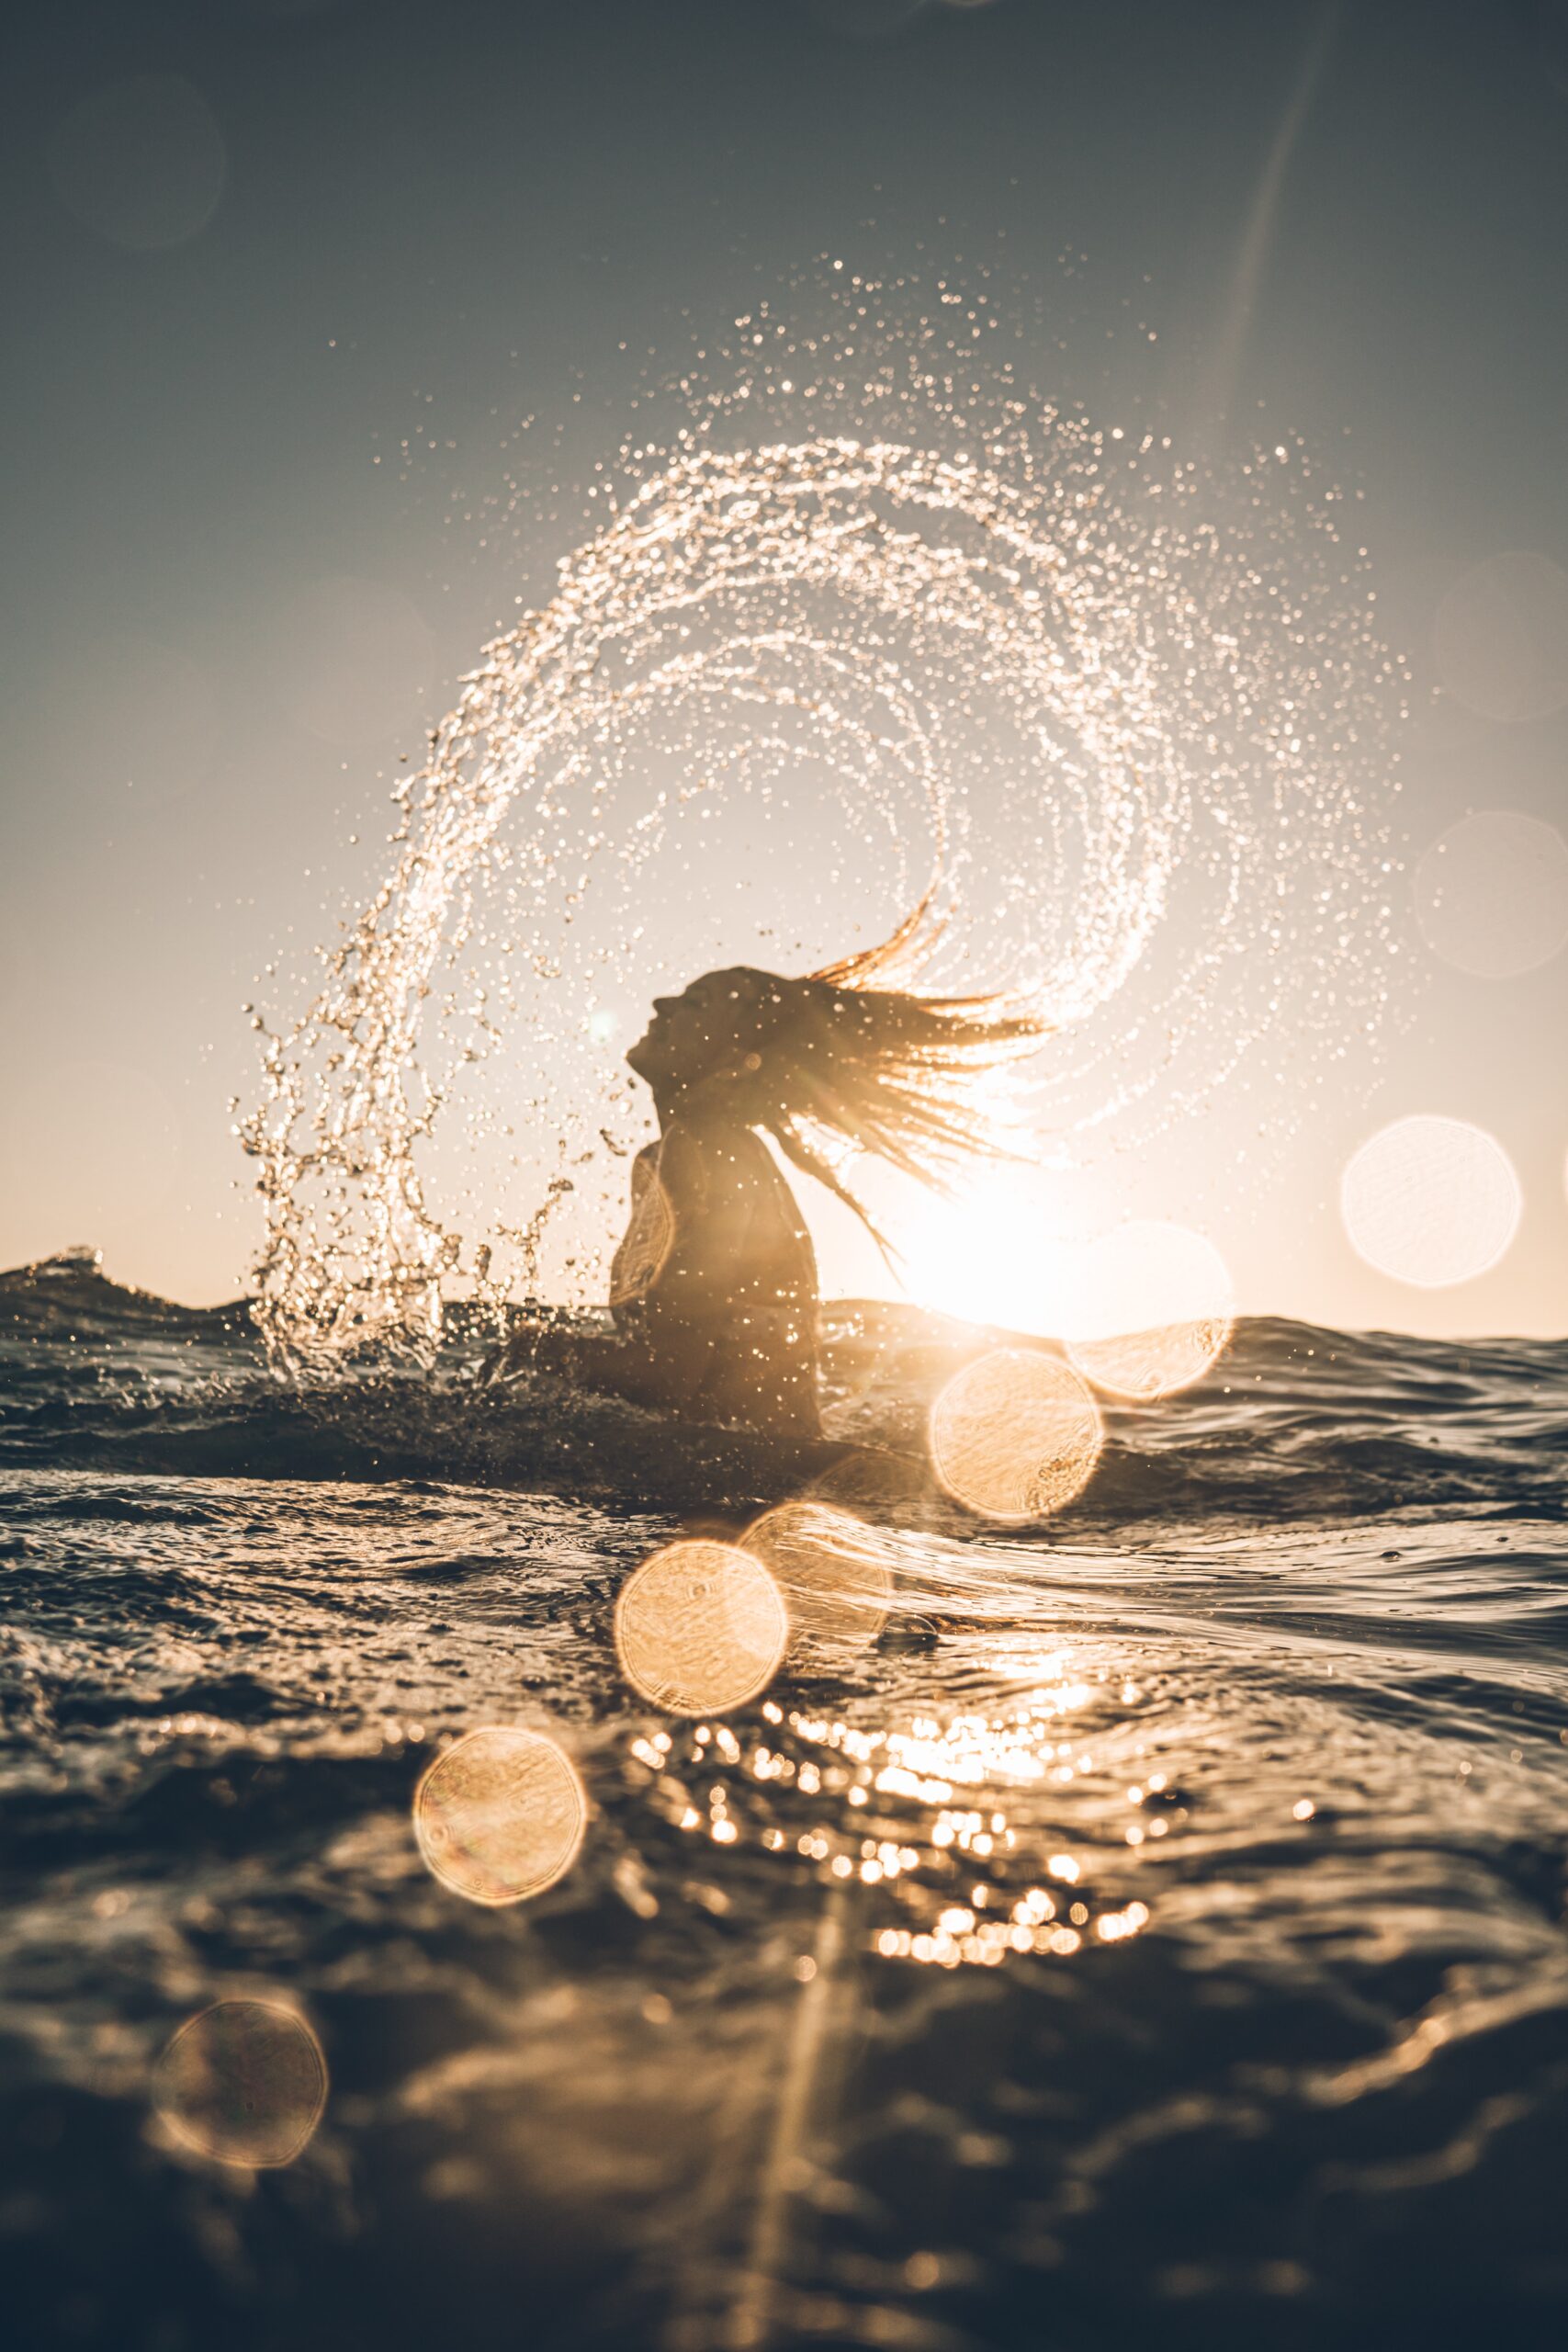 person with long hair emerging from the water splashing an arc of water from their hair against the sunset